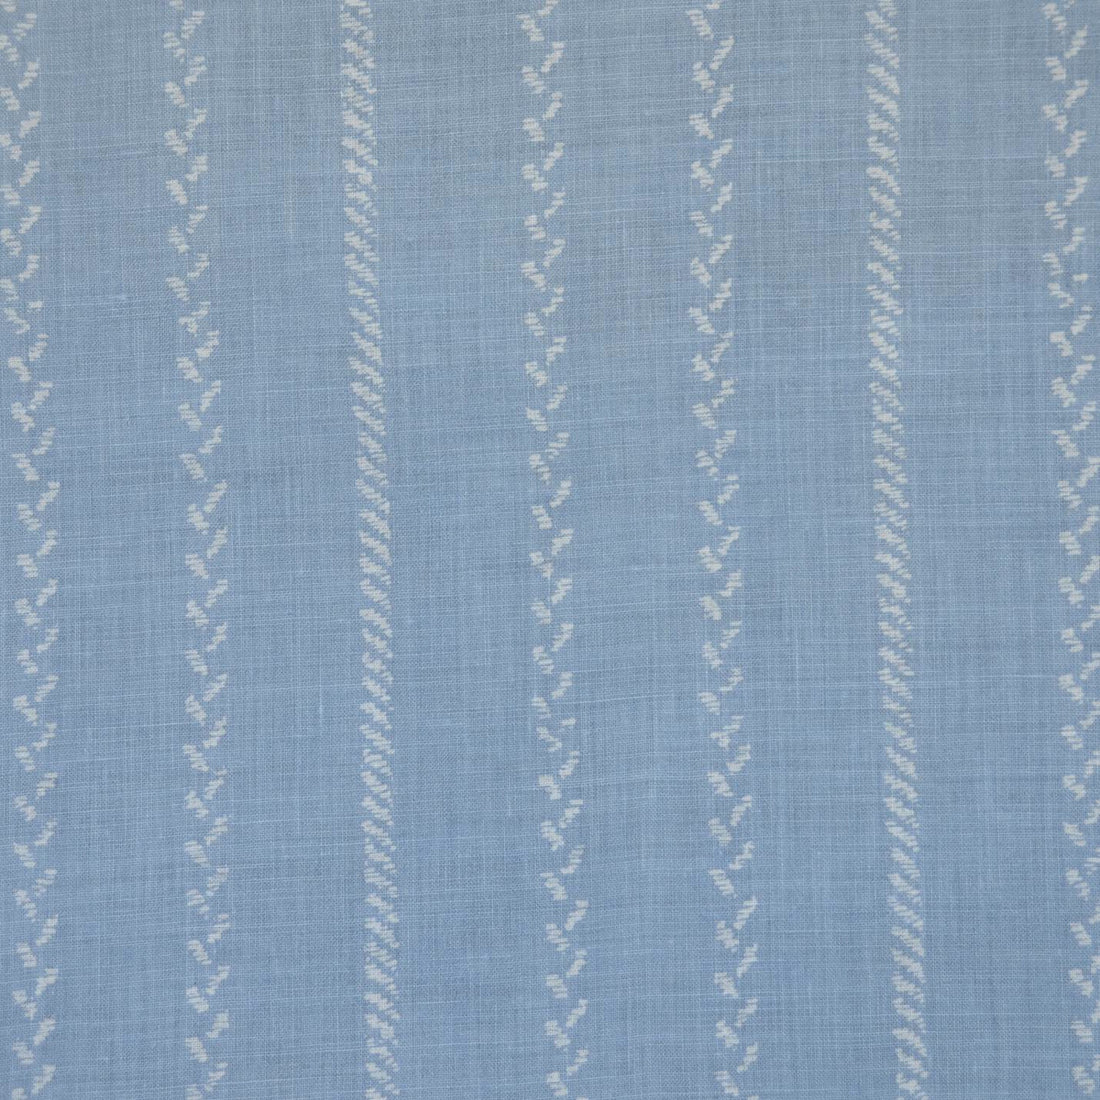 Pelham Stripe fabric in blue color - pattern BFC-3507.15.0 - by Lee Jofa in the Blithfield collection